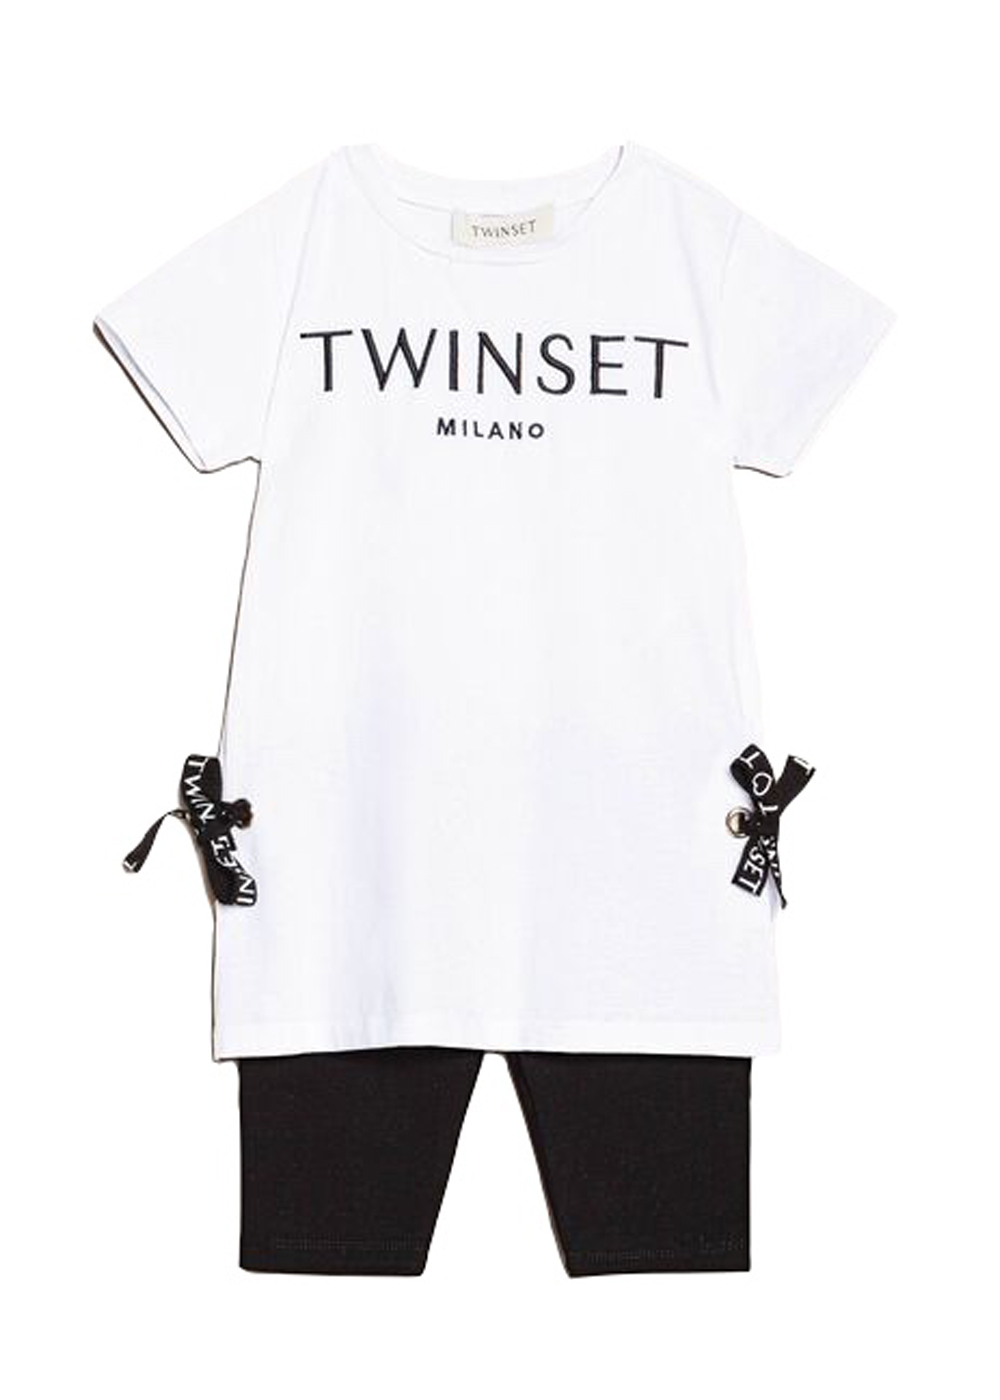 Featured image for “Twinset Maxi T-shirt e leggings”